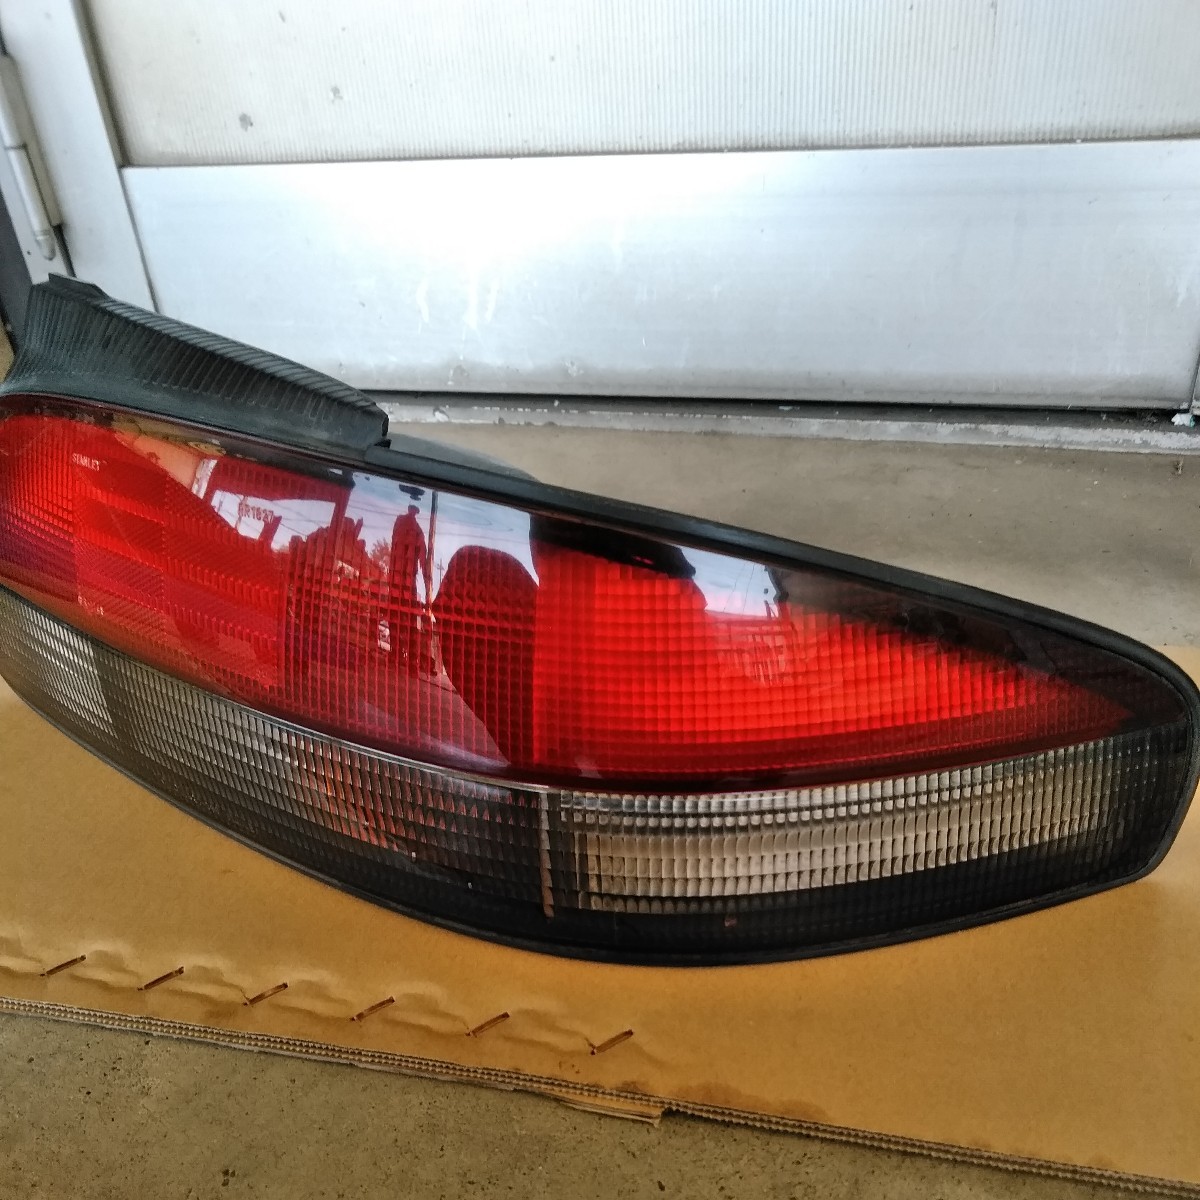  Toyota Curren latter term right tail lamp tail light STANLEY 20-366 ST206 ST207 ST208 81550-2B310